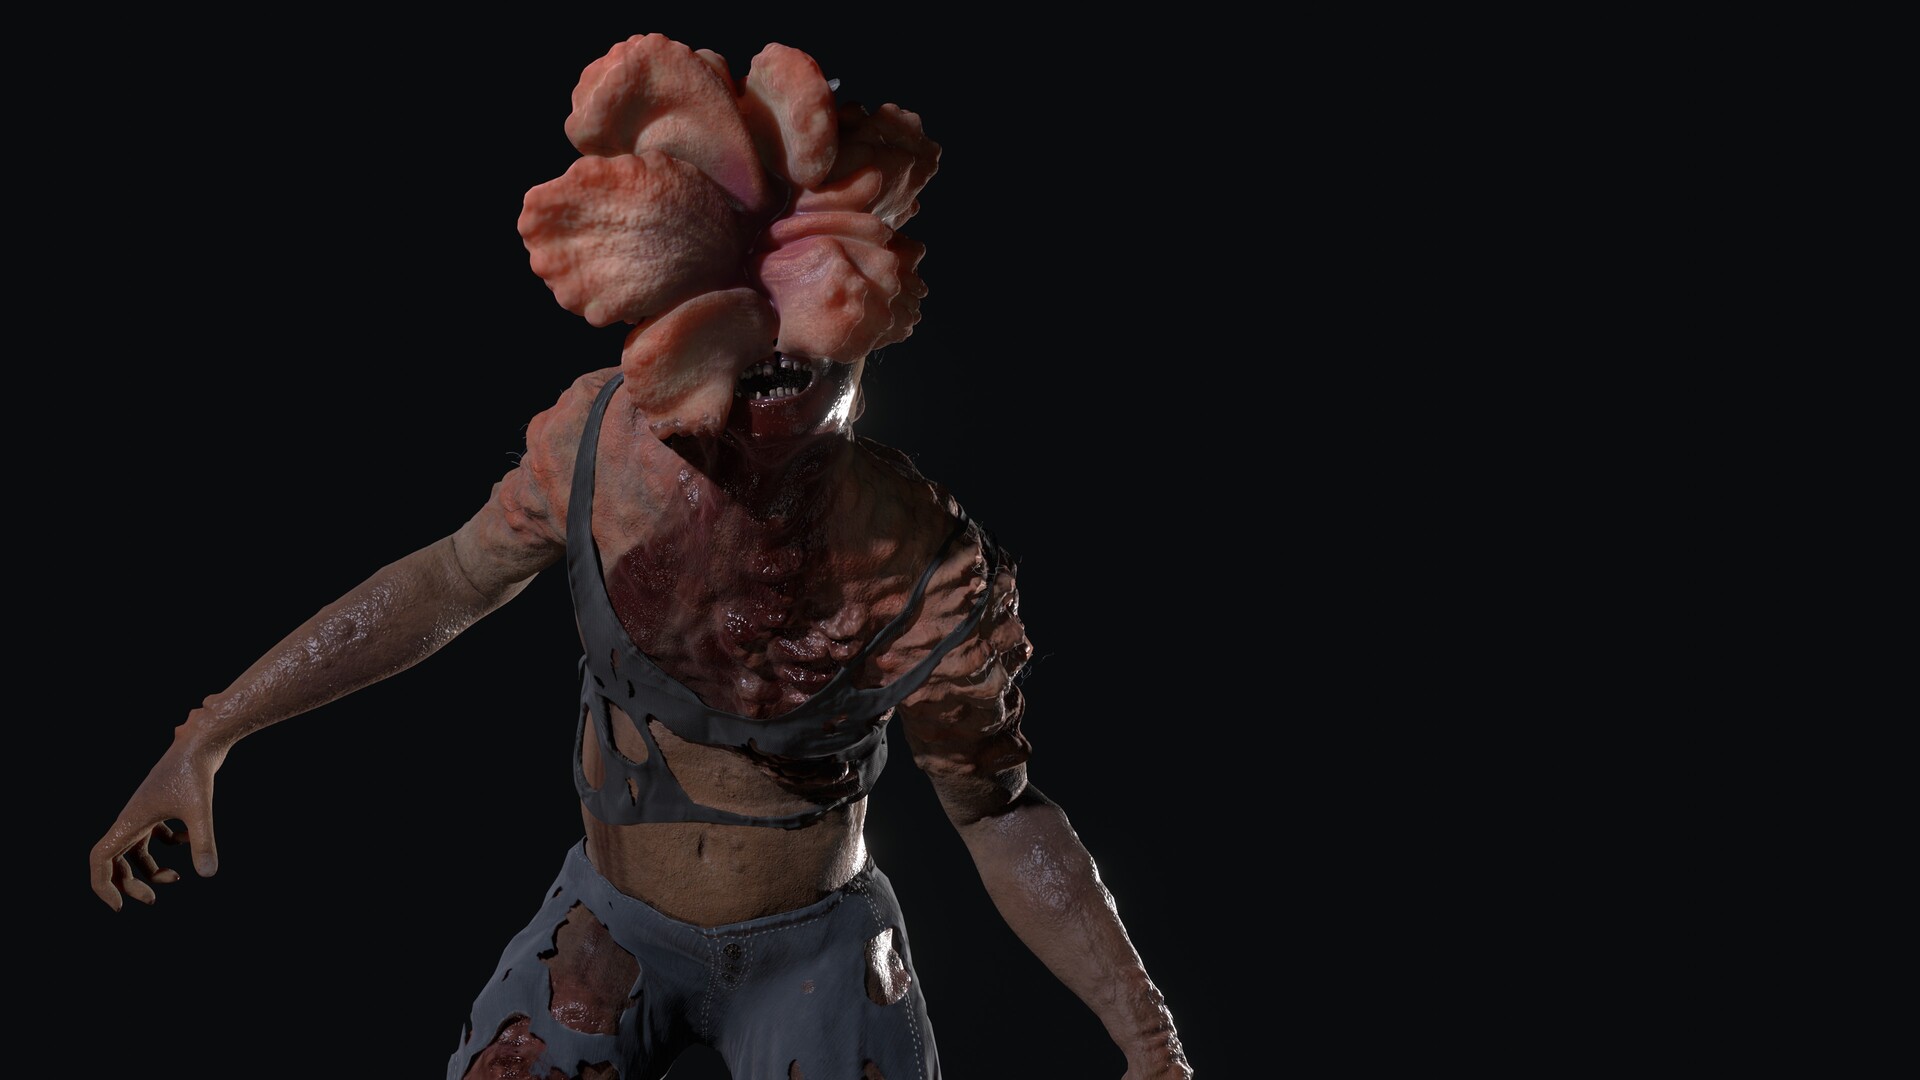 I made a Clicker from The Last of Us 